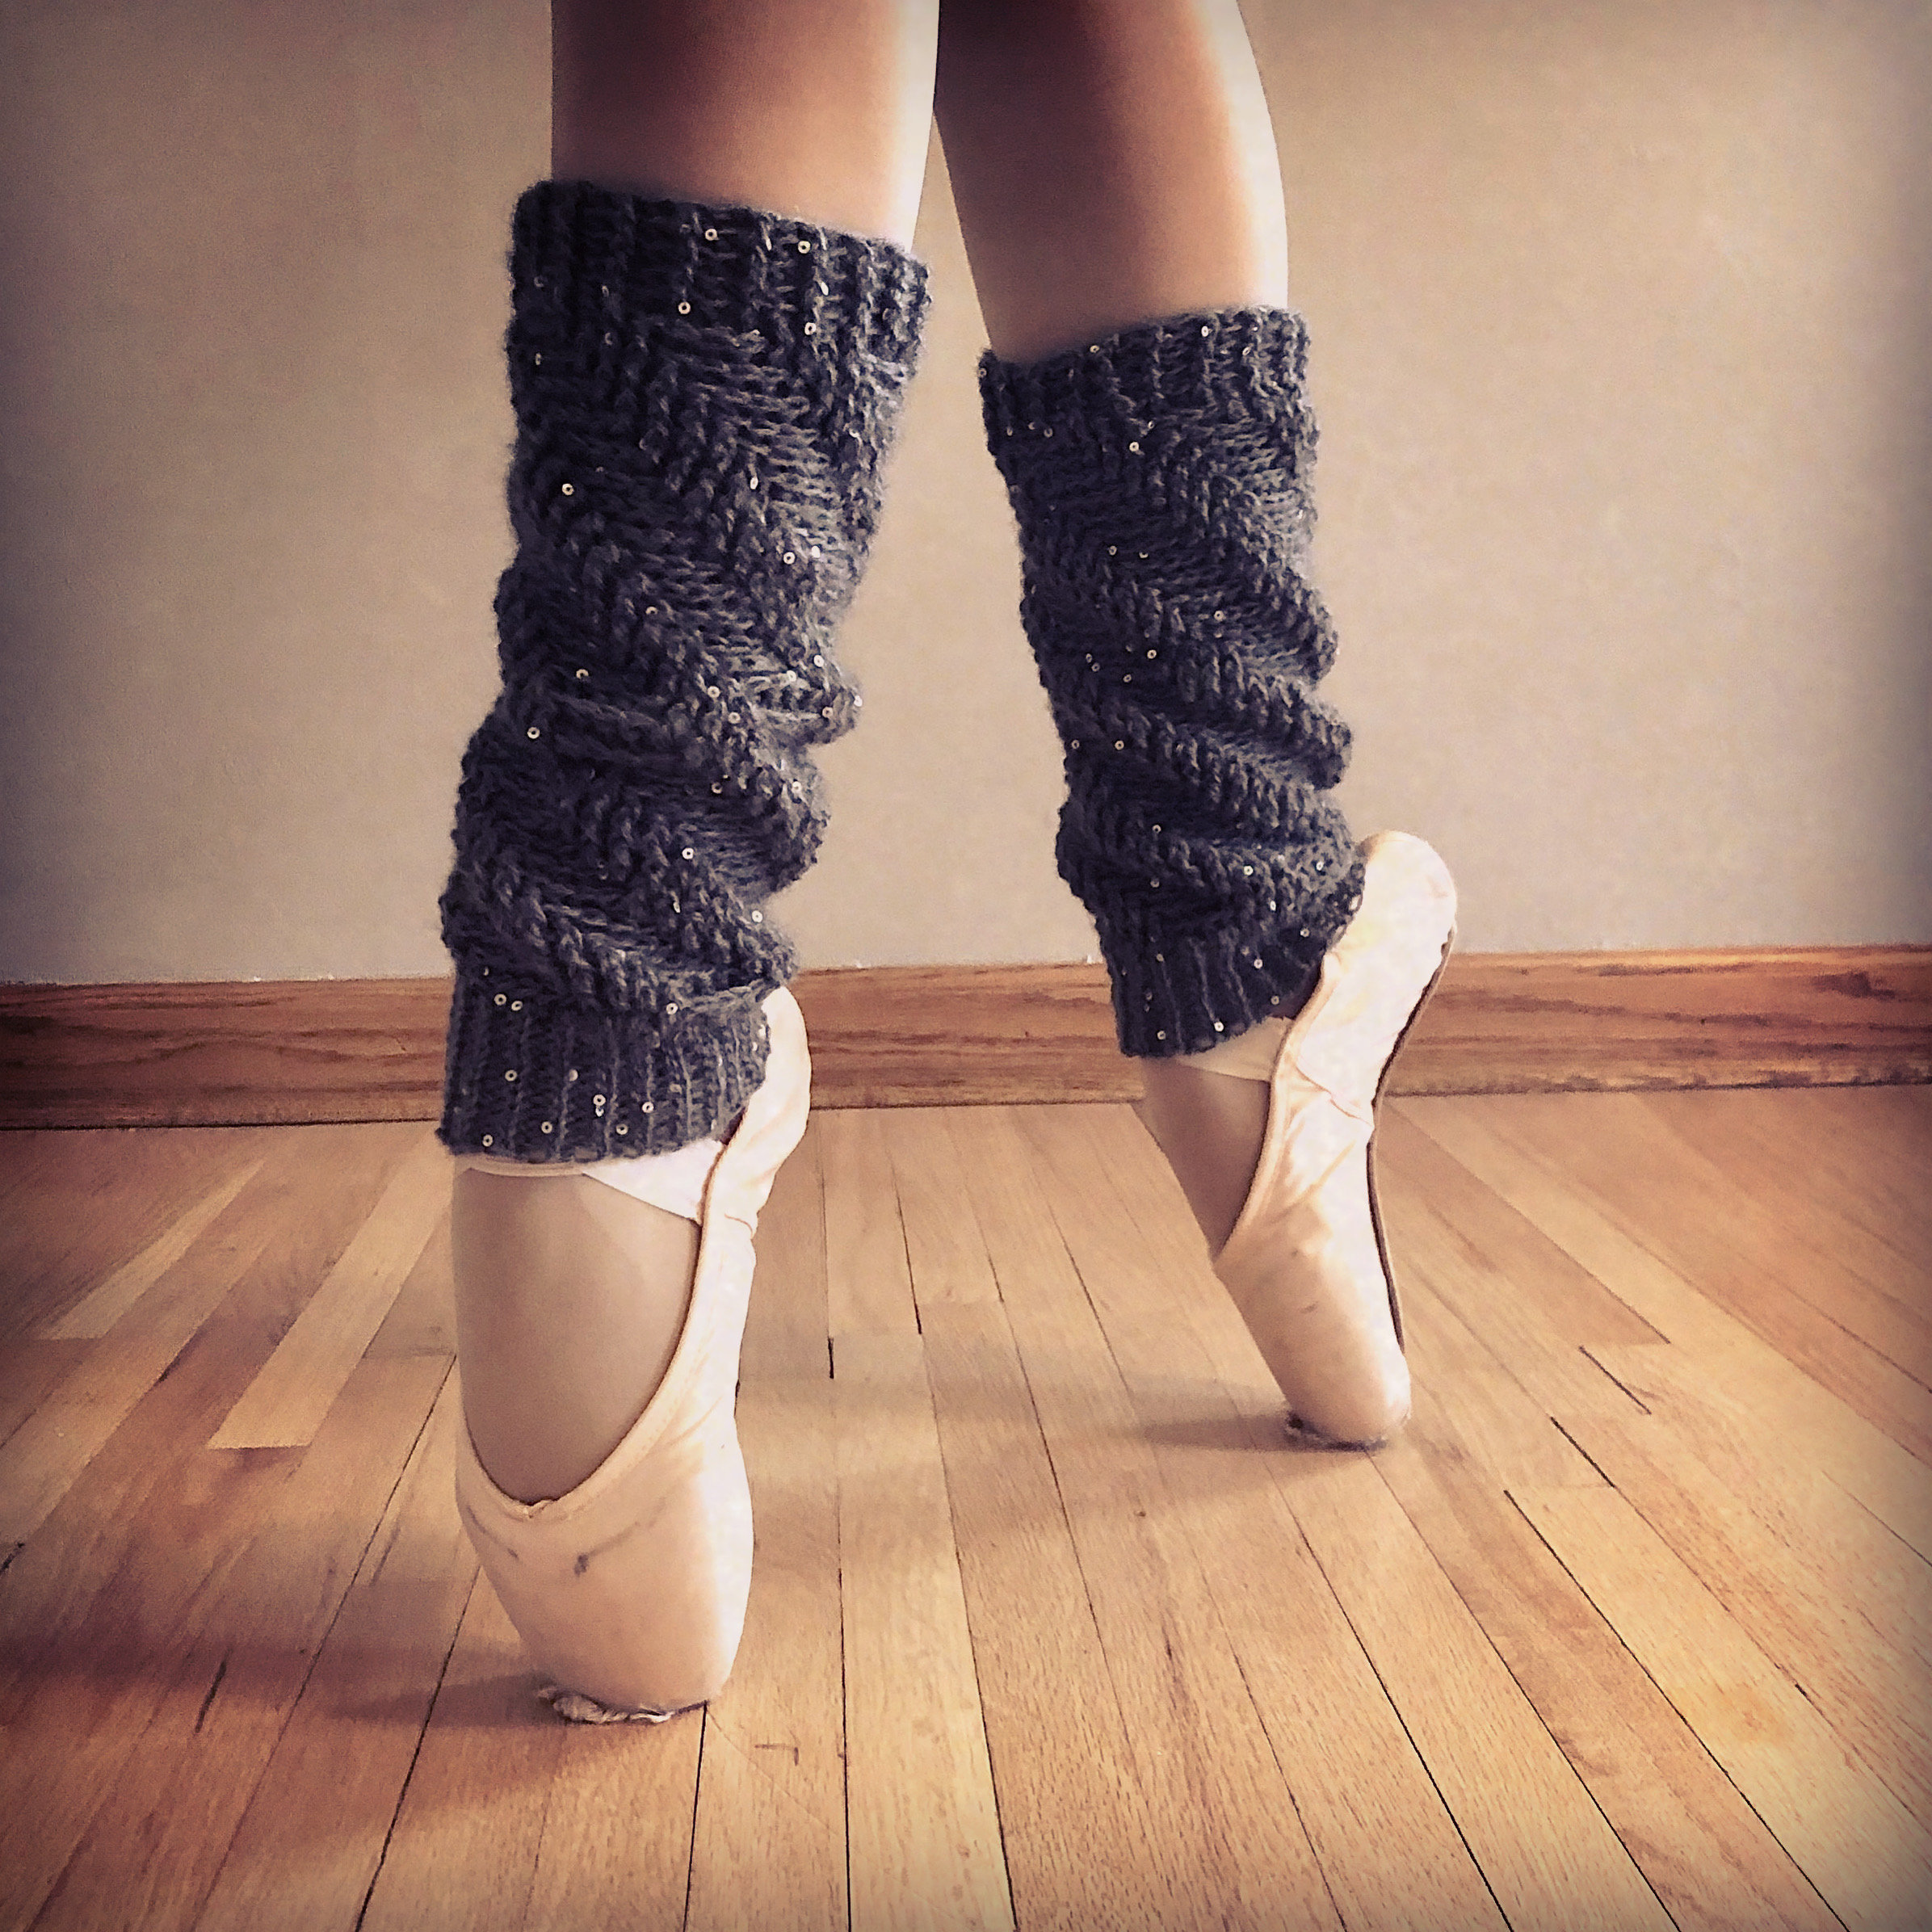 Lace Up Leg Warmers – Favorite Child